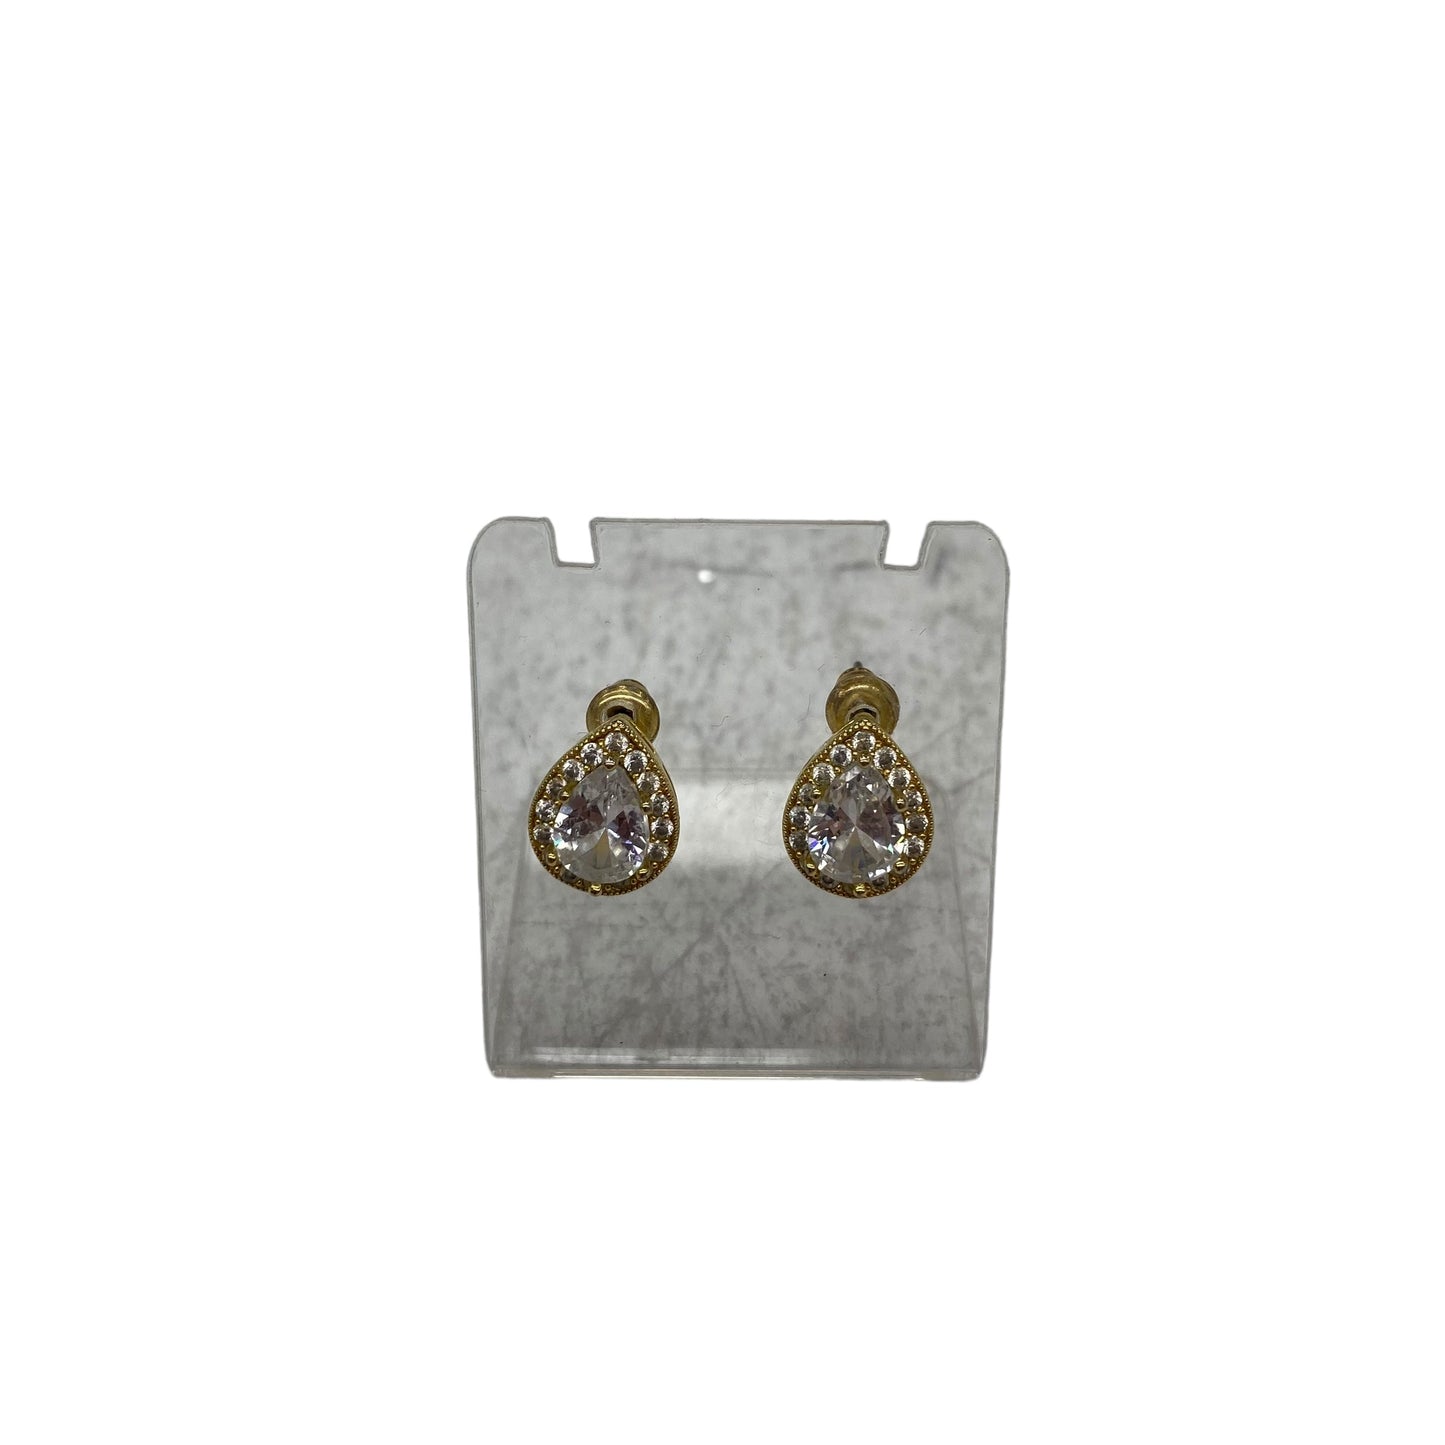 GOLD EARRINGS STUD by CLOTHES MENTOR